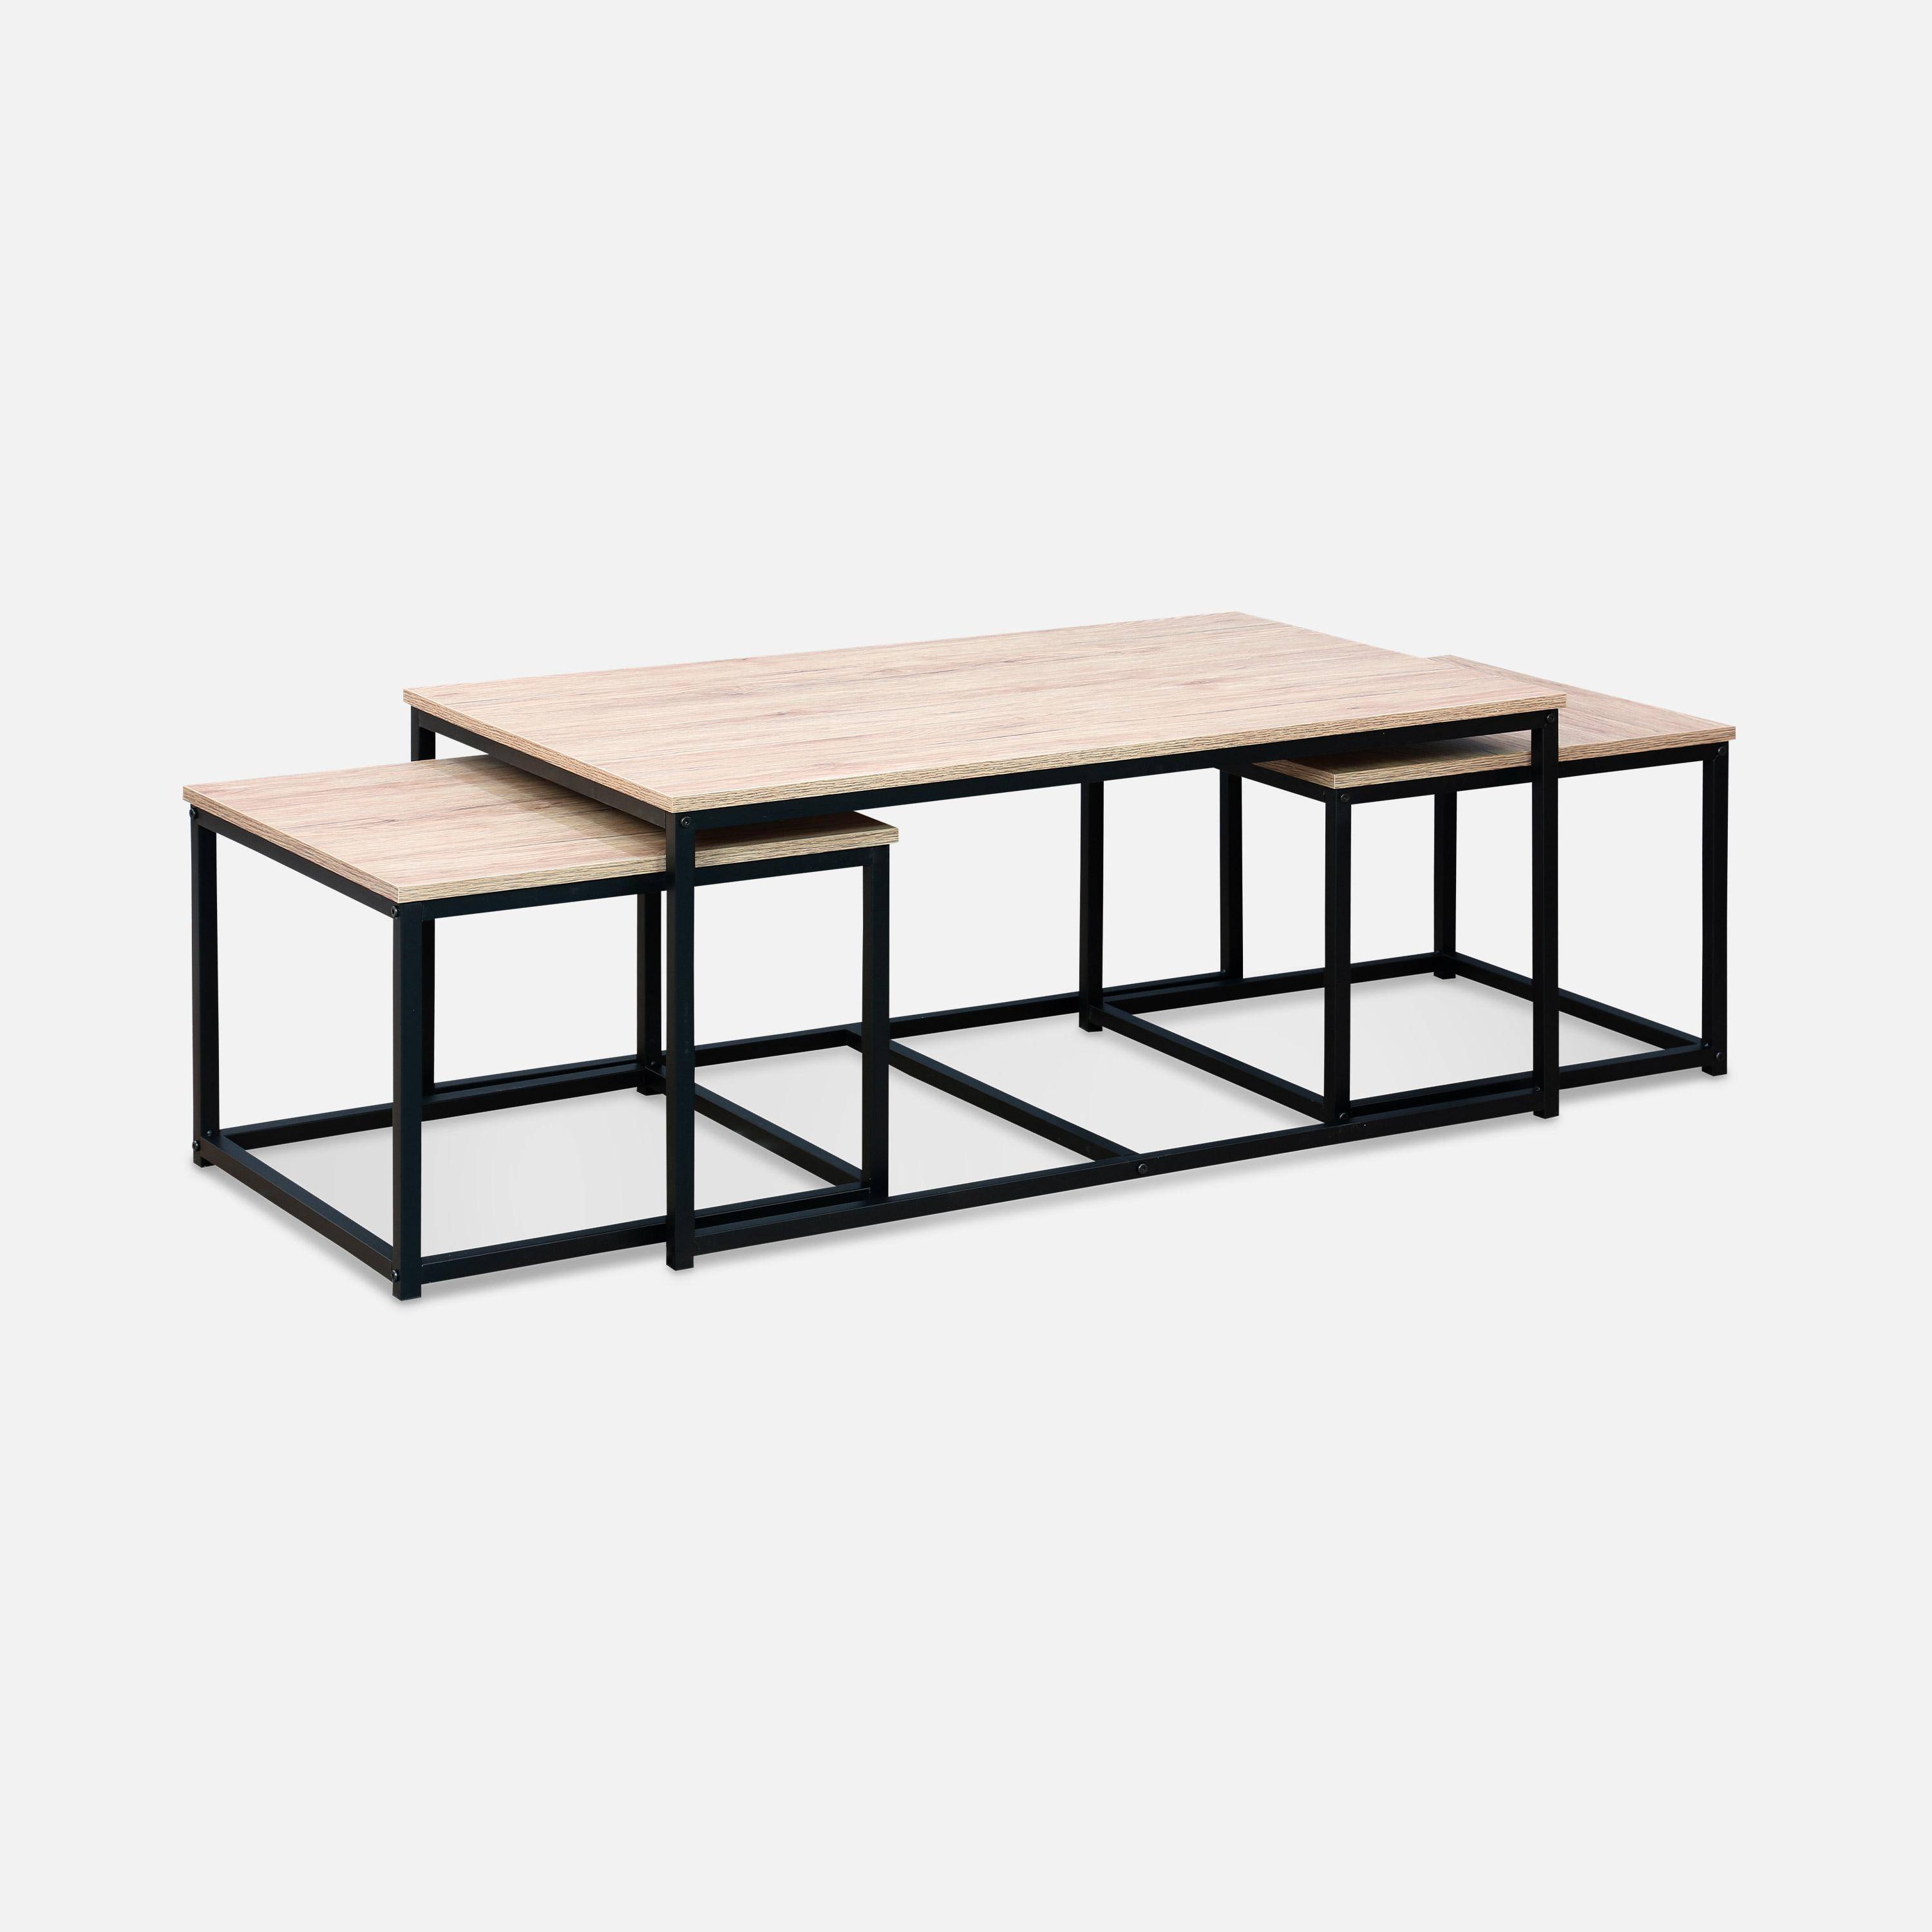 Set of 3 metal and wood-effect nesting tables, large table 100x60x45cm, 2x small tables 50x50x38cm - Loft - Black Photo3